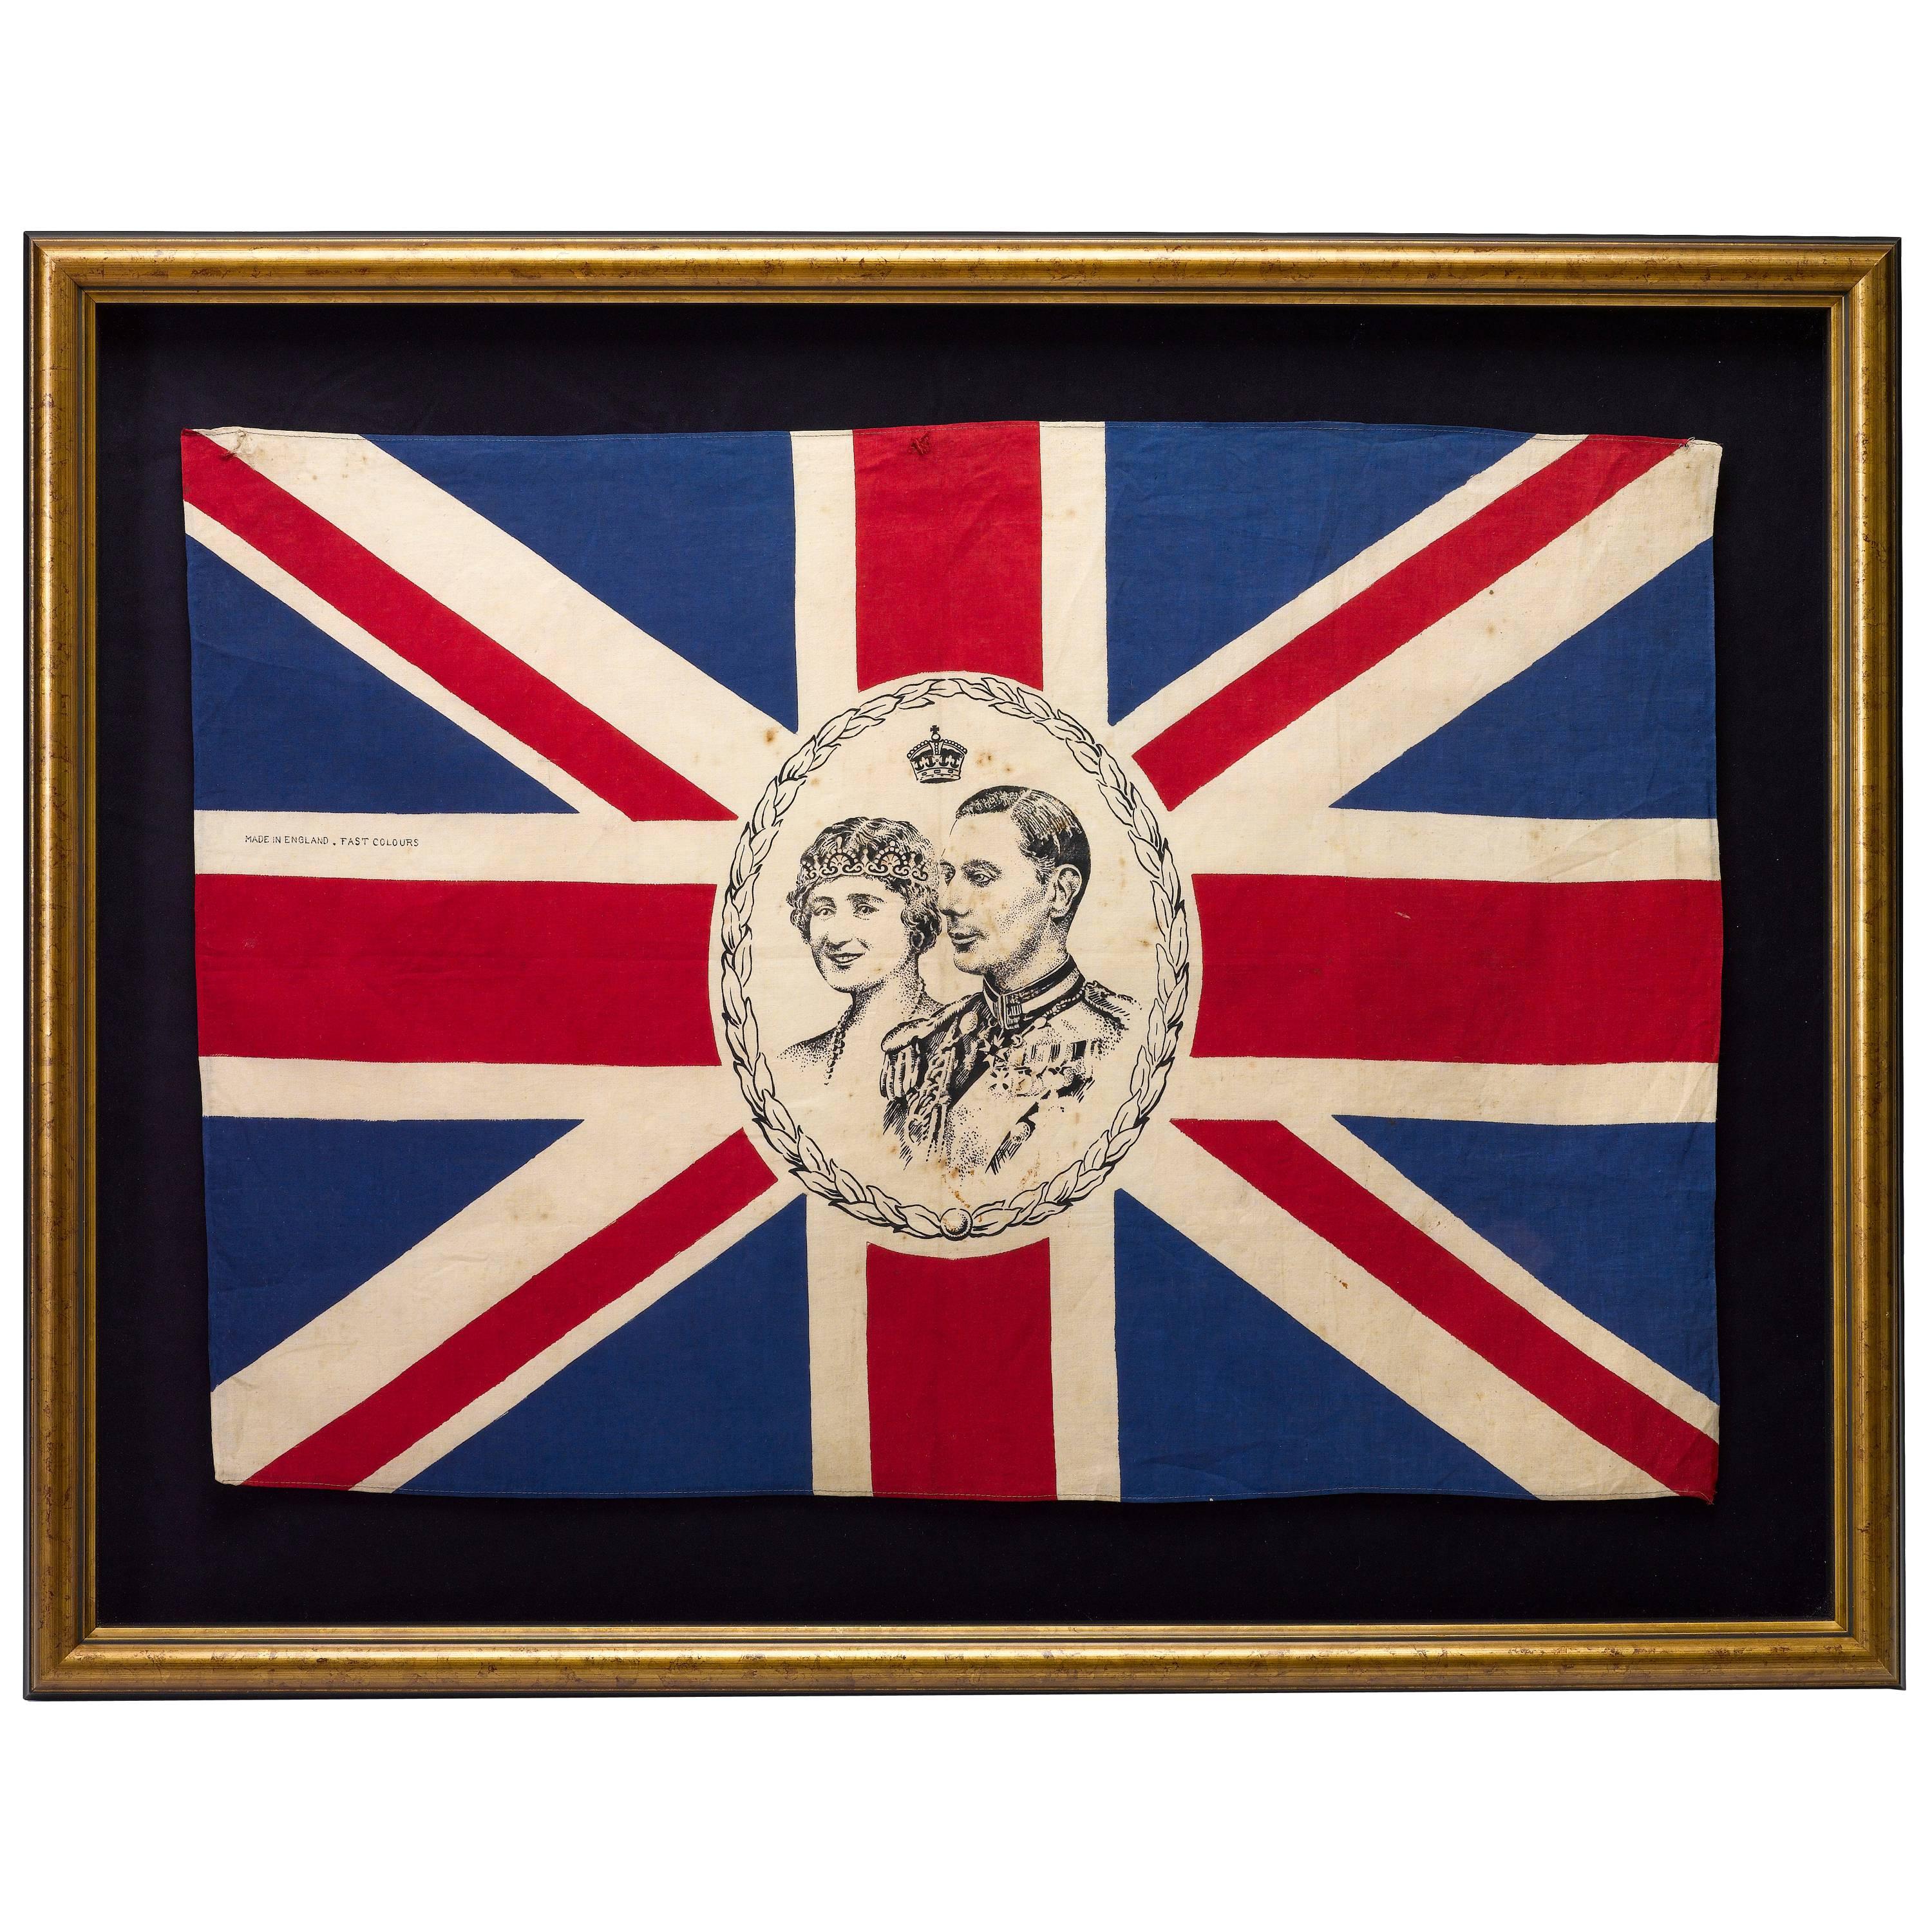 King George VI and Queen Mother Coronation Flag, circa 1936